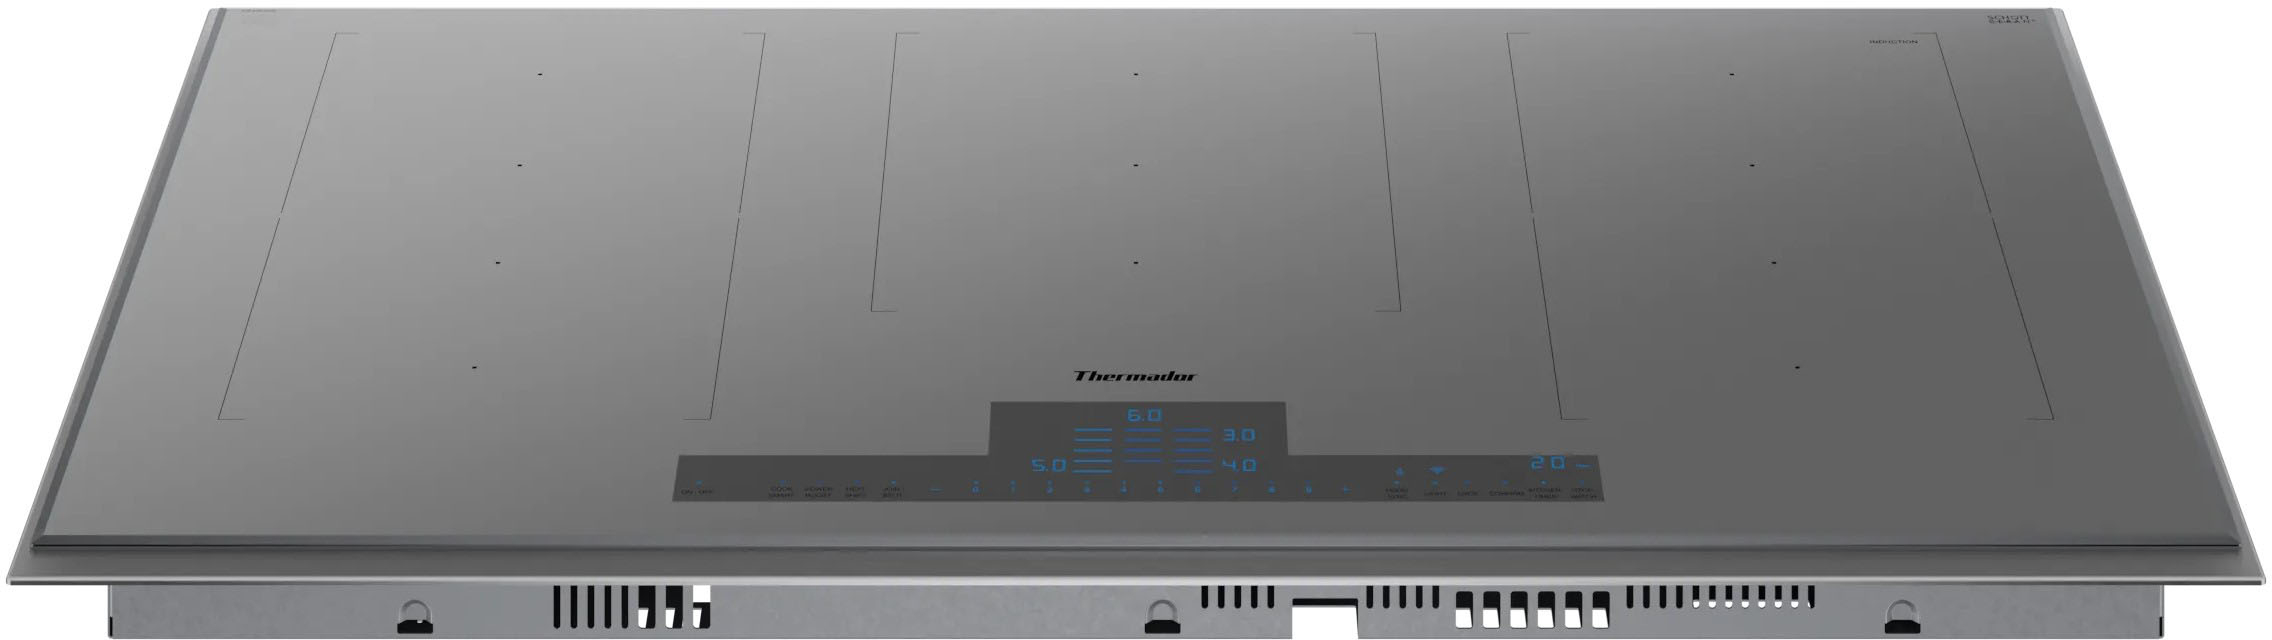 Thermador Masterpiece Series 36 Built-In Electric Cooktop with 5 elements  Black CET366TB - Best Buy